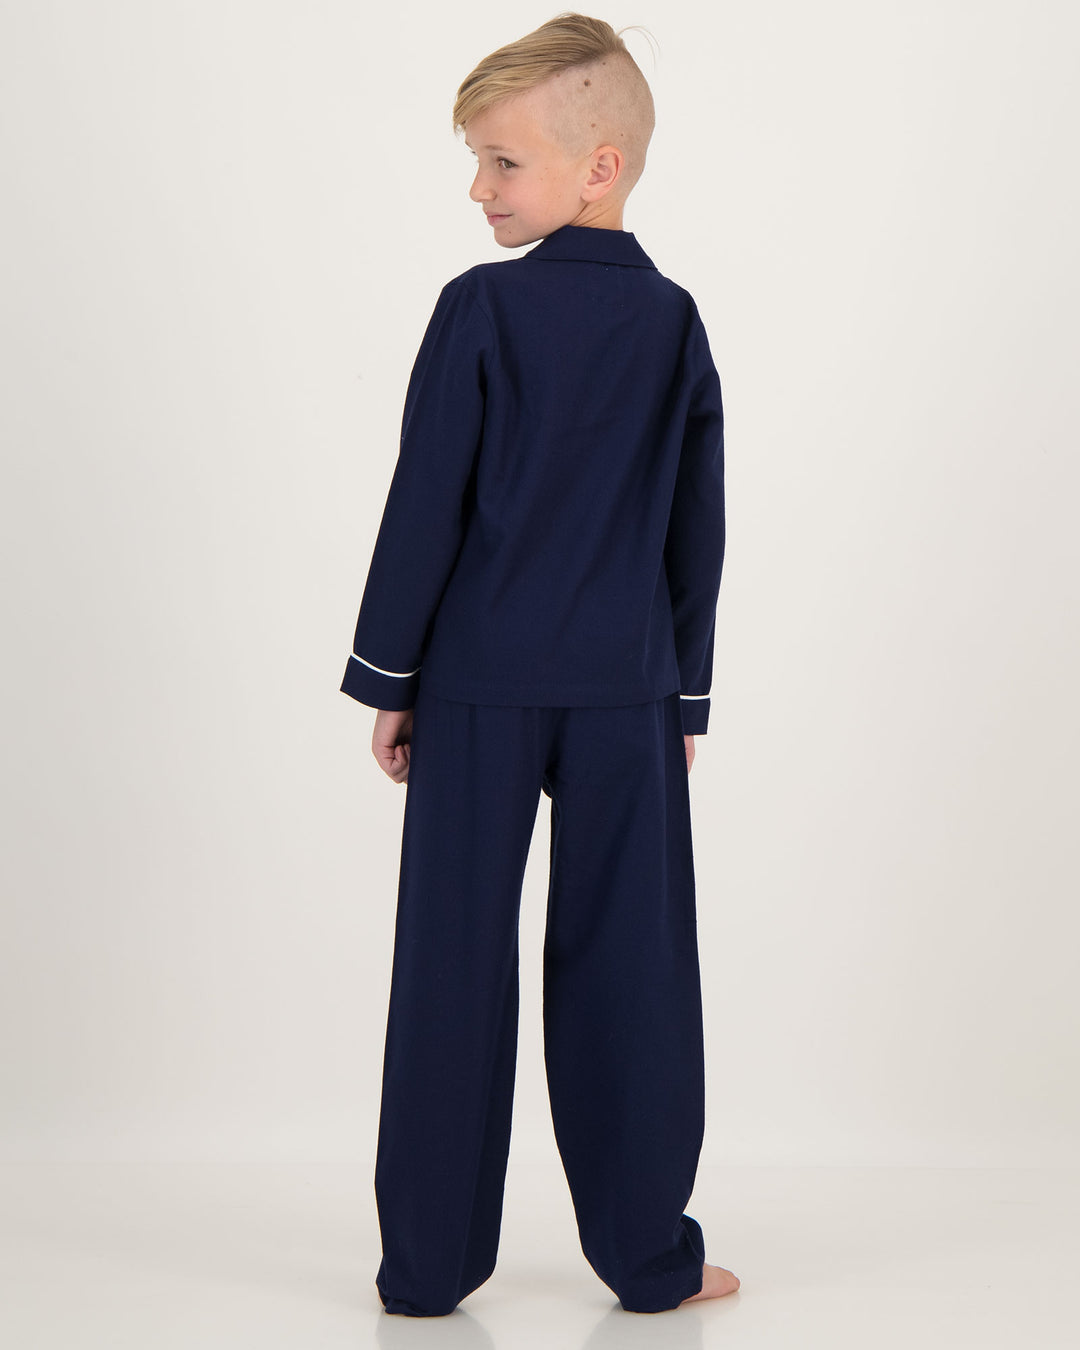 Boys Long Flannel Pyjamas Navy with White Piping Back - Woodstock Laundry SA